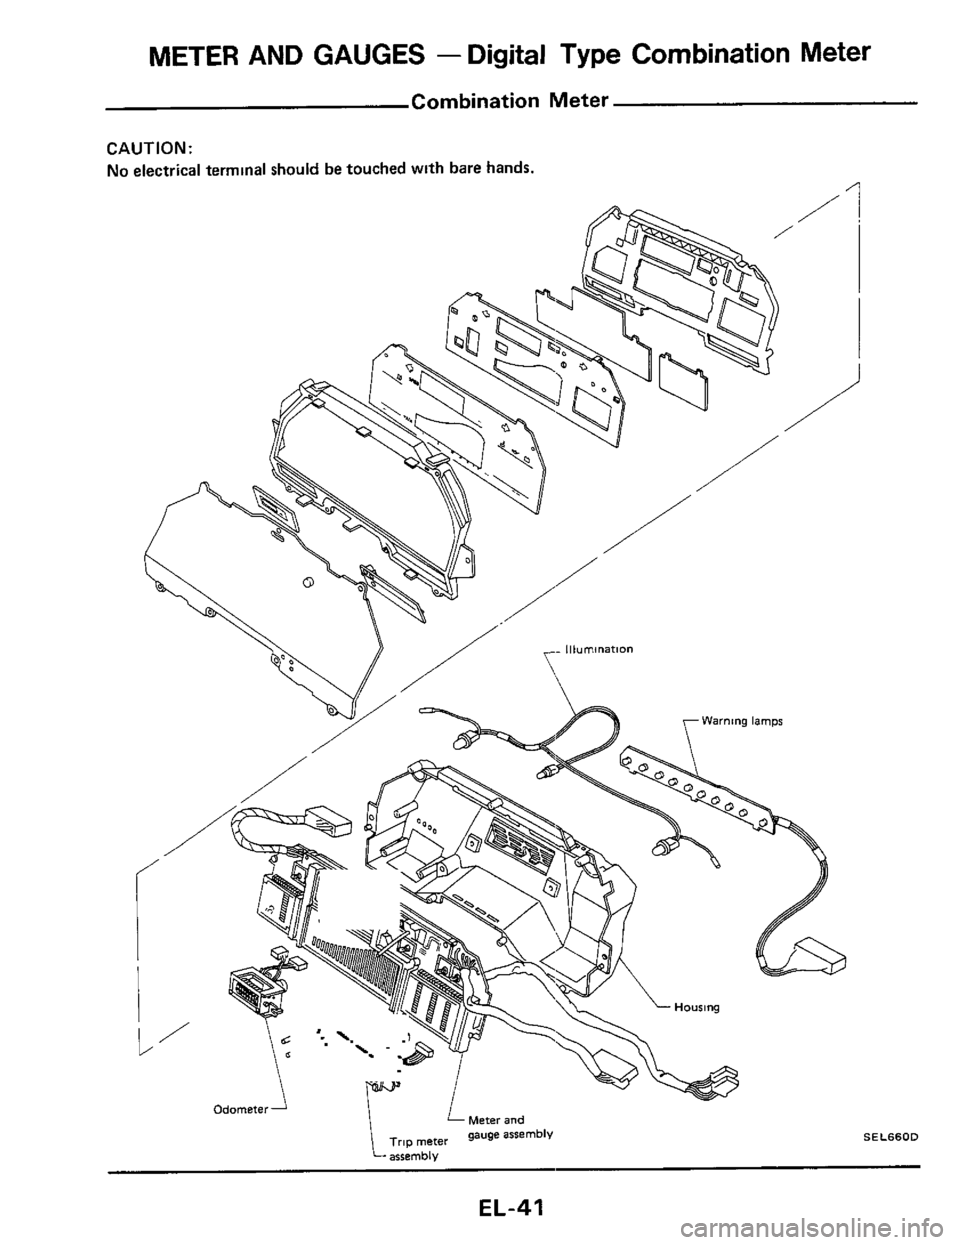 NISSAN 300ZX 1984 Z31 Electrical System Service Manual METER AND GAUGES - Digital  Type  Combination  Meter 
combination  Meter 
CAUTION: 
No  electrical terminal  should be touched  wlth bare hands. 
EL-41  